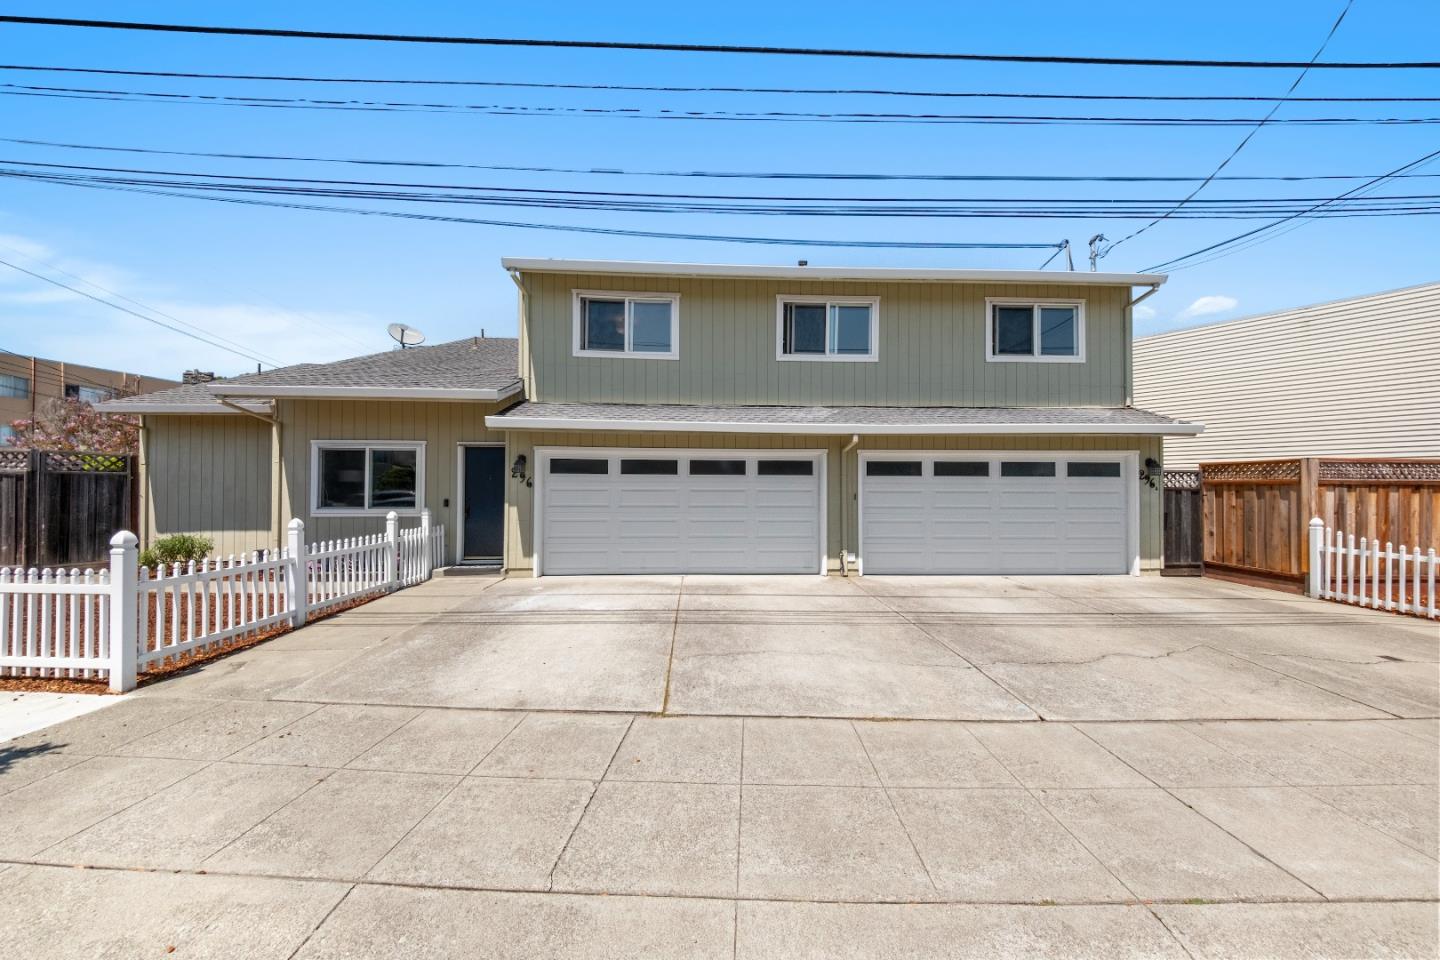 Charming and unique corner lot duplex at 296 Terrace Avenue located in the San Bruno Park neighborhood, the heart of San Bruno.  Built in 1977, this property's main unit features 3 bedrooms and 3.5 baths, including an ensuite bathroom in the primary bedroom. The third level offers an impressive bonus space with potential use as a 4th bedroom/office with a full bathroom. Adjacent to the private patio, the well-appointed kitchen has stainless steel appliances, granite countertops, and inset birch cabinetry. Second unit features an equally well-equipped kitchen with a loft bedroom, bathroom,  in-unit washer and dryer, and private patio, ideal for guests or rental income. The main unit offers 2,105 s/f and the second unit has 760 s/f of living space, along with two 2-car garages.  Prime location near Tanforan Mall, Artichoke Joe's, and downtown San Bruno. Easy access to CalTrain, BART, highways 101 & 280, and just 3 miles from SFO. Ideal for investors or multi-family living.